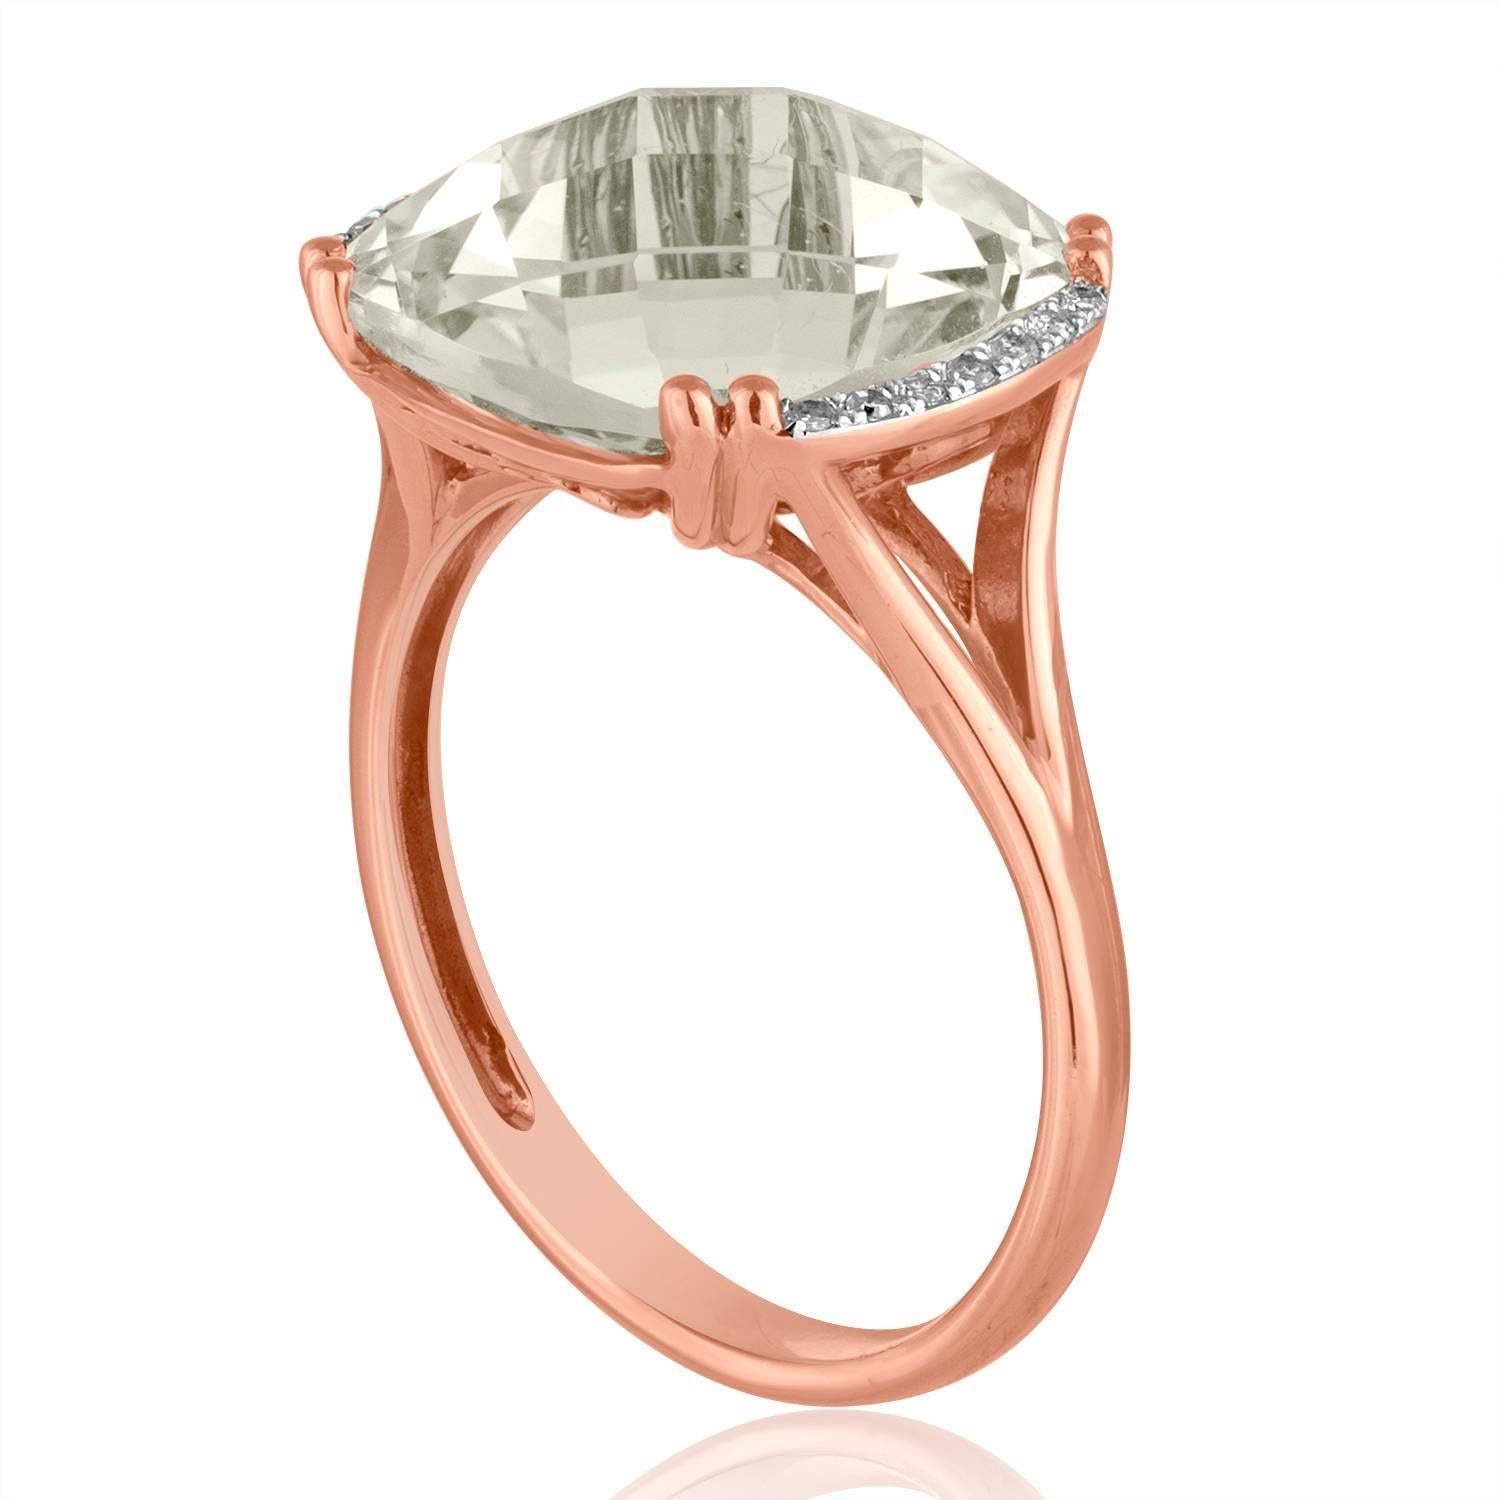 Stunning White Topaz Ring
The ring is 14K Rose Gold
There are 0.06 Carats in Diamonds H SI
The center stone is a Cushion Cut White Topaz 7.56 Carats
The top measures 10/16